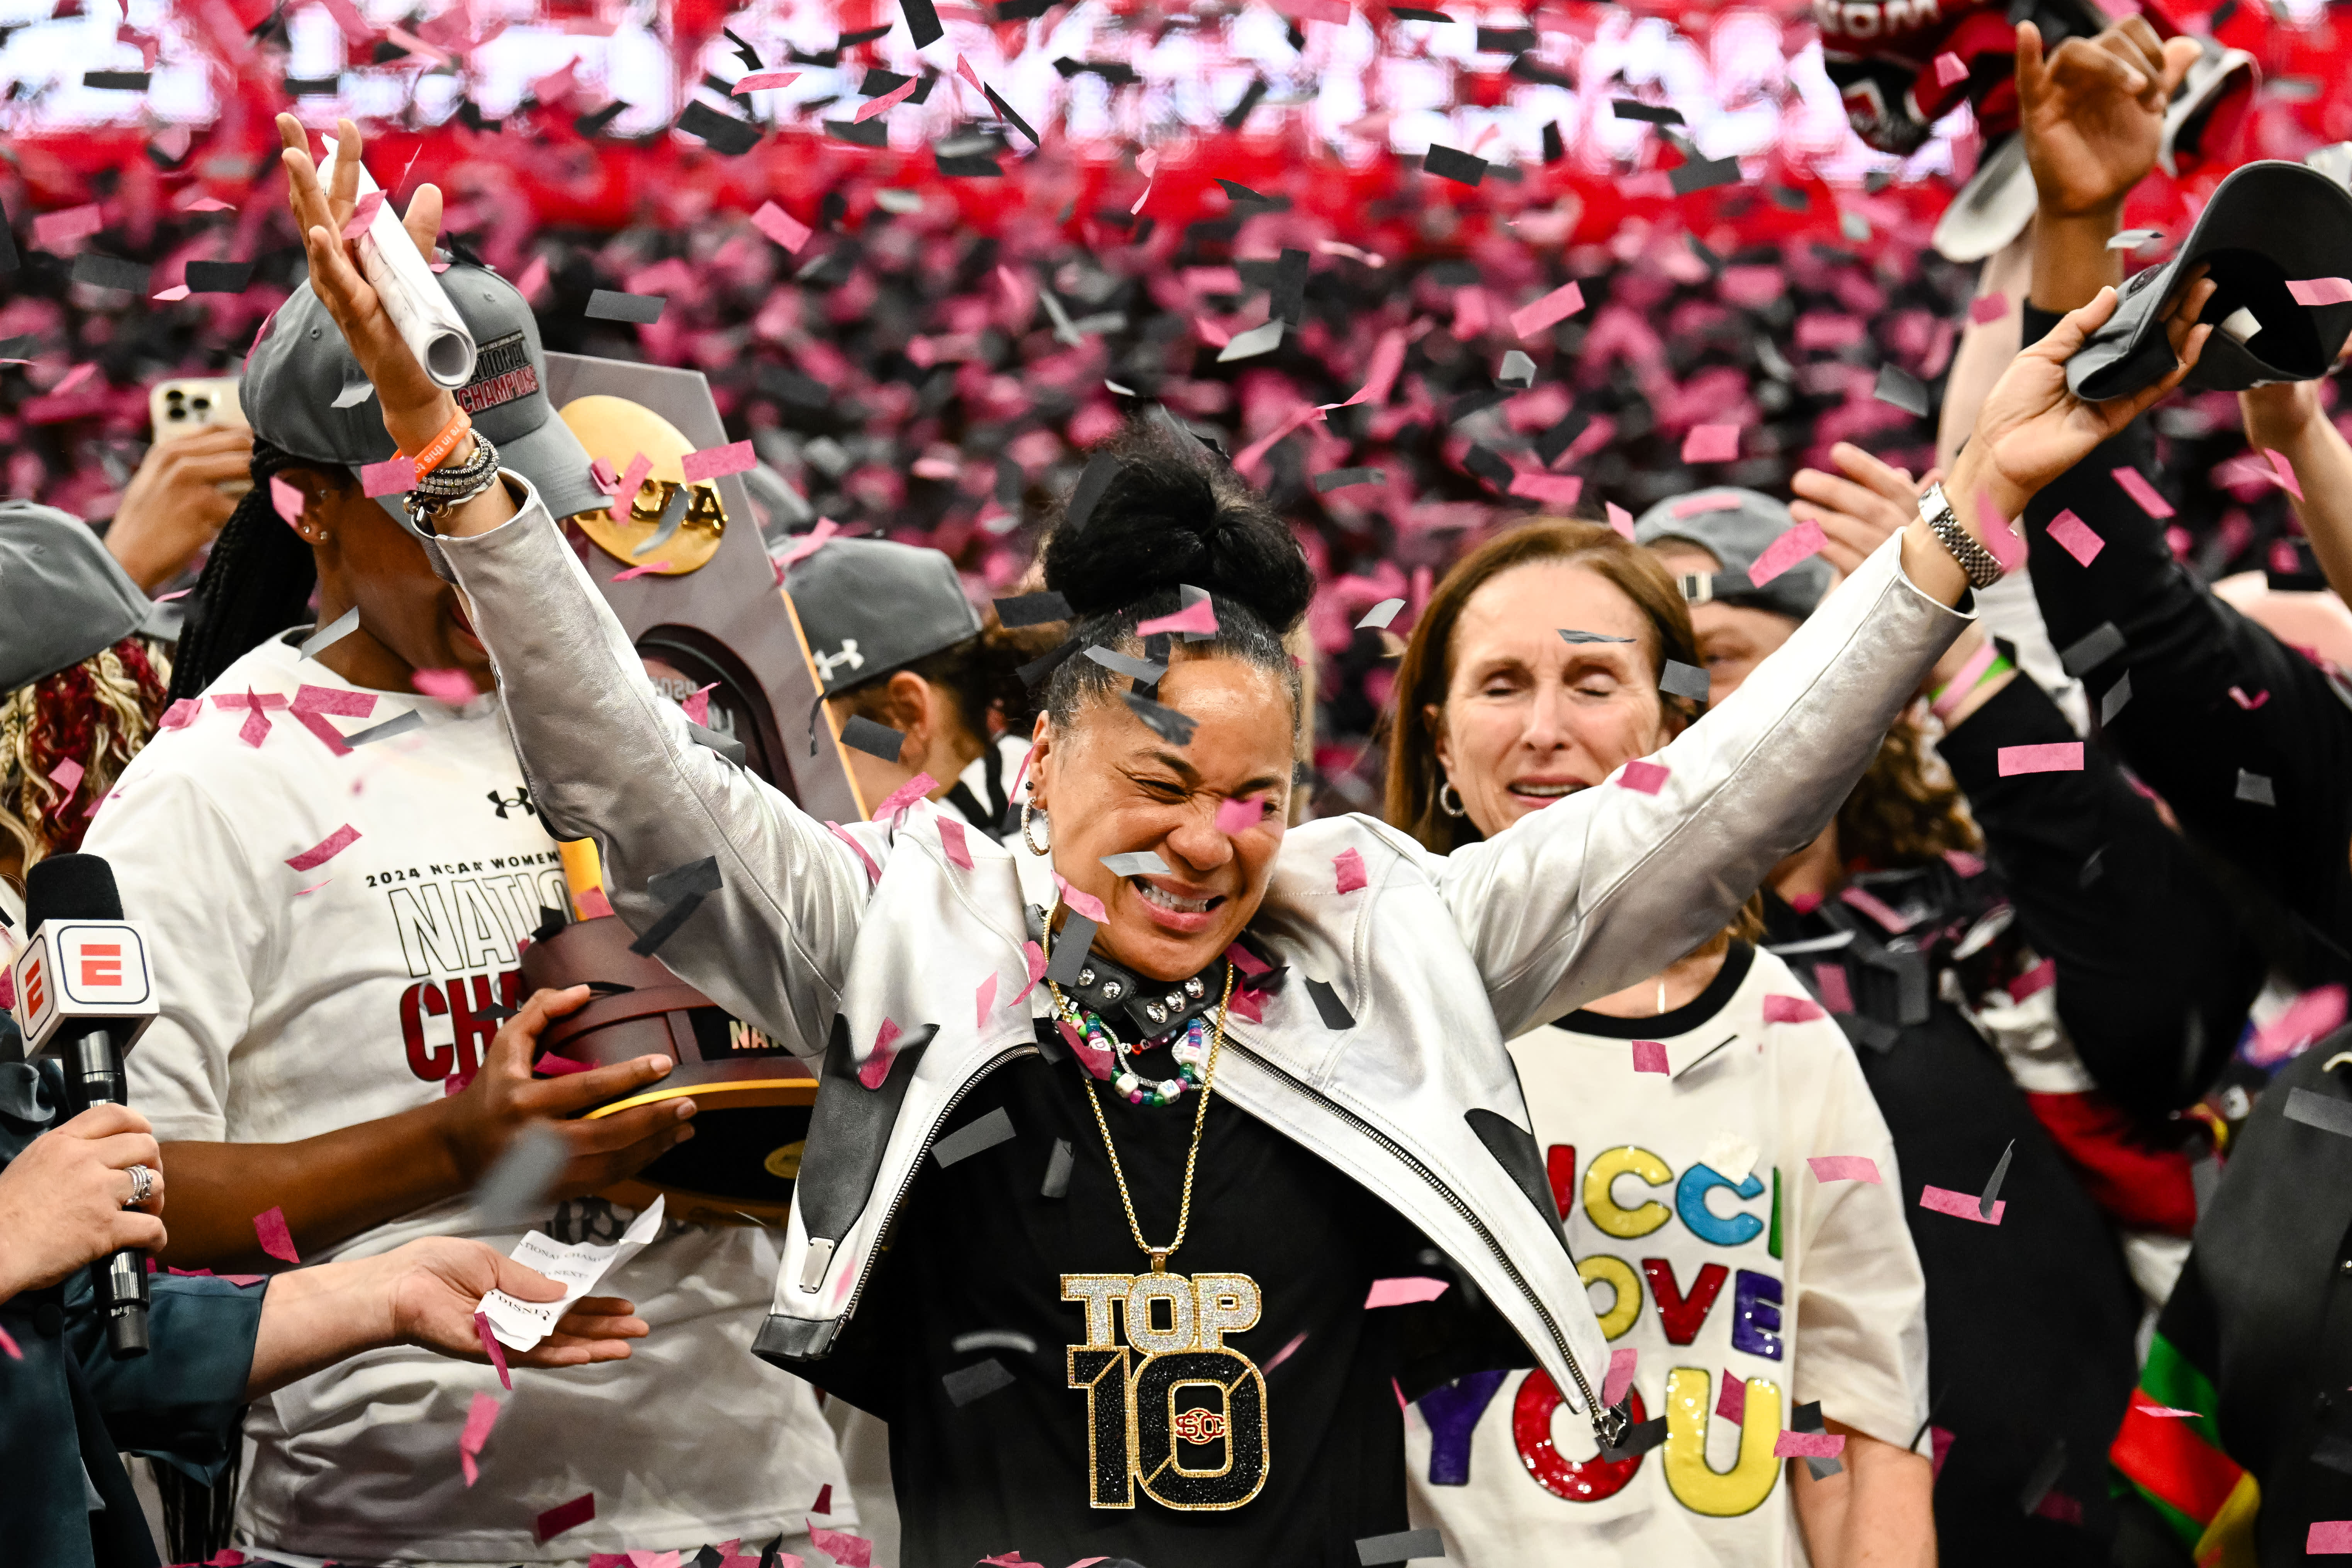 Dawn Staley, South Carolina coach, advocates for increased investment in women’s sports